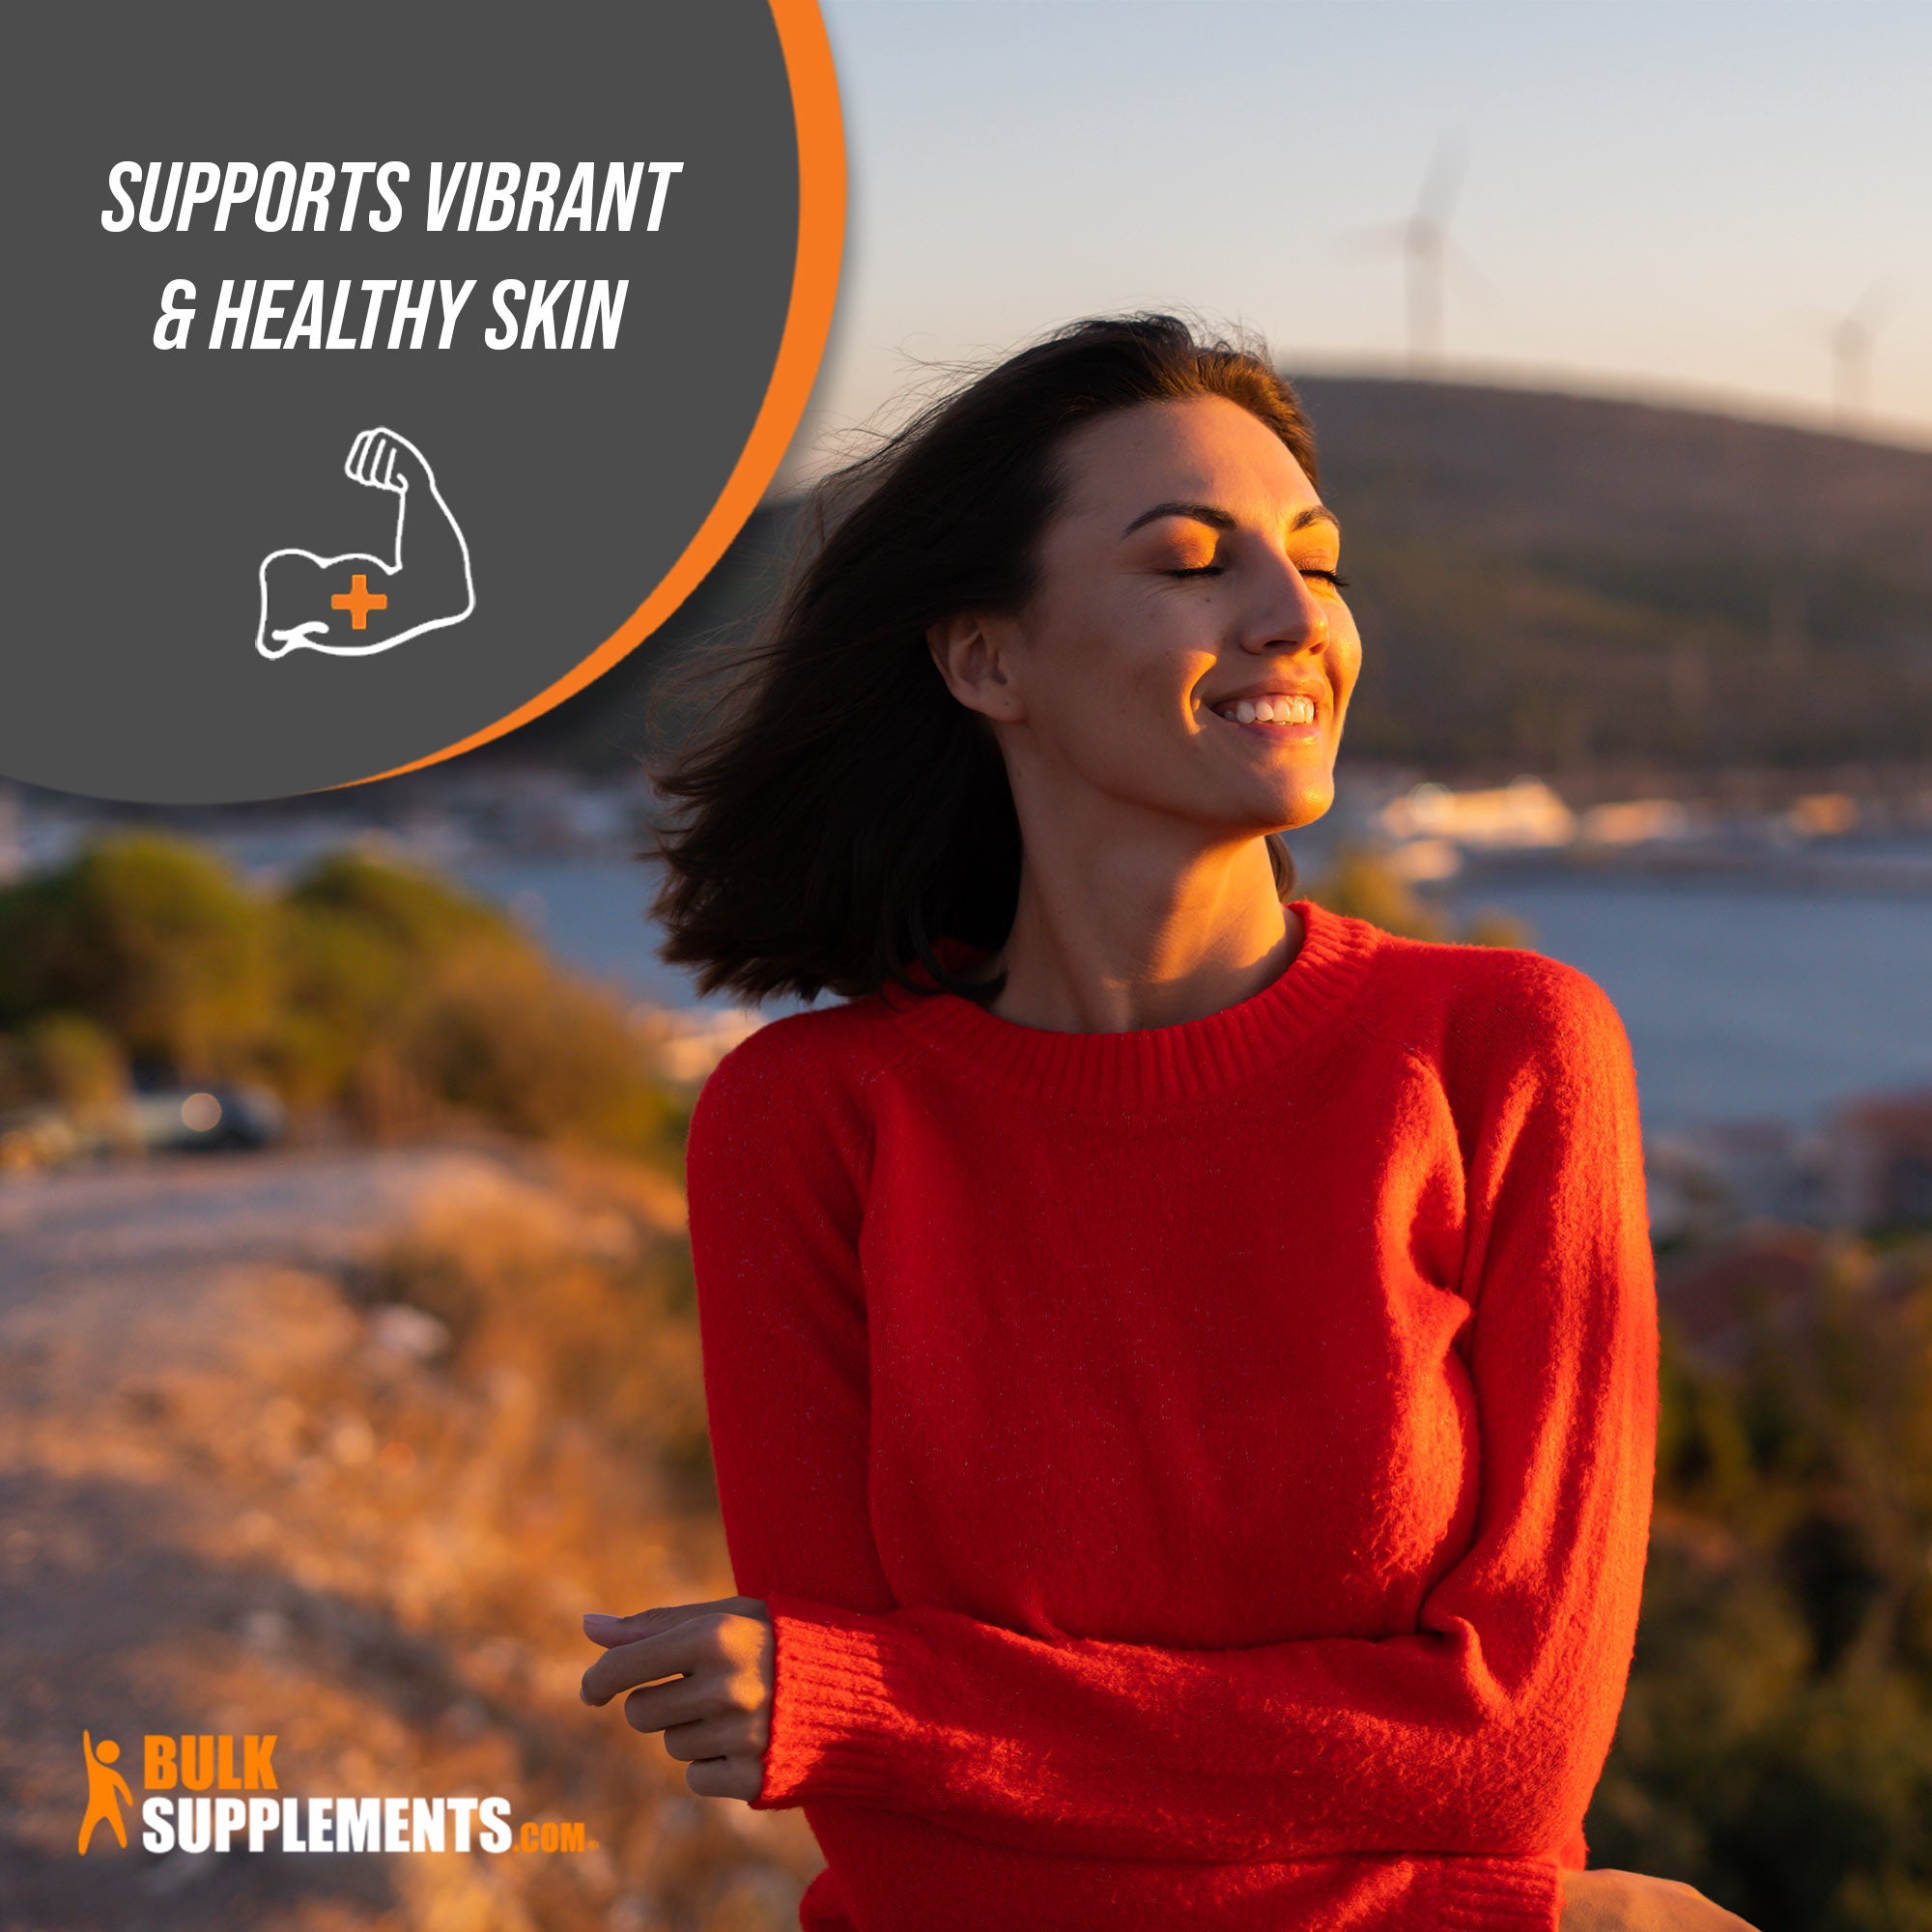 DL-Phenylalanine Skincare Supplements for Vibrant and Healthy Skin